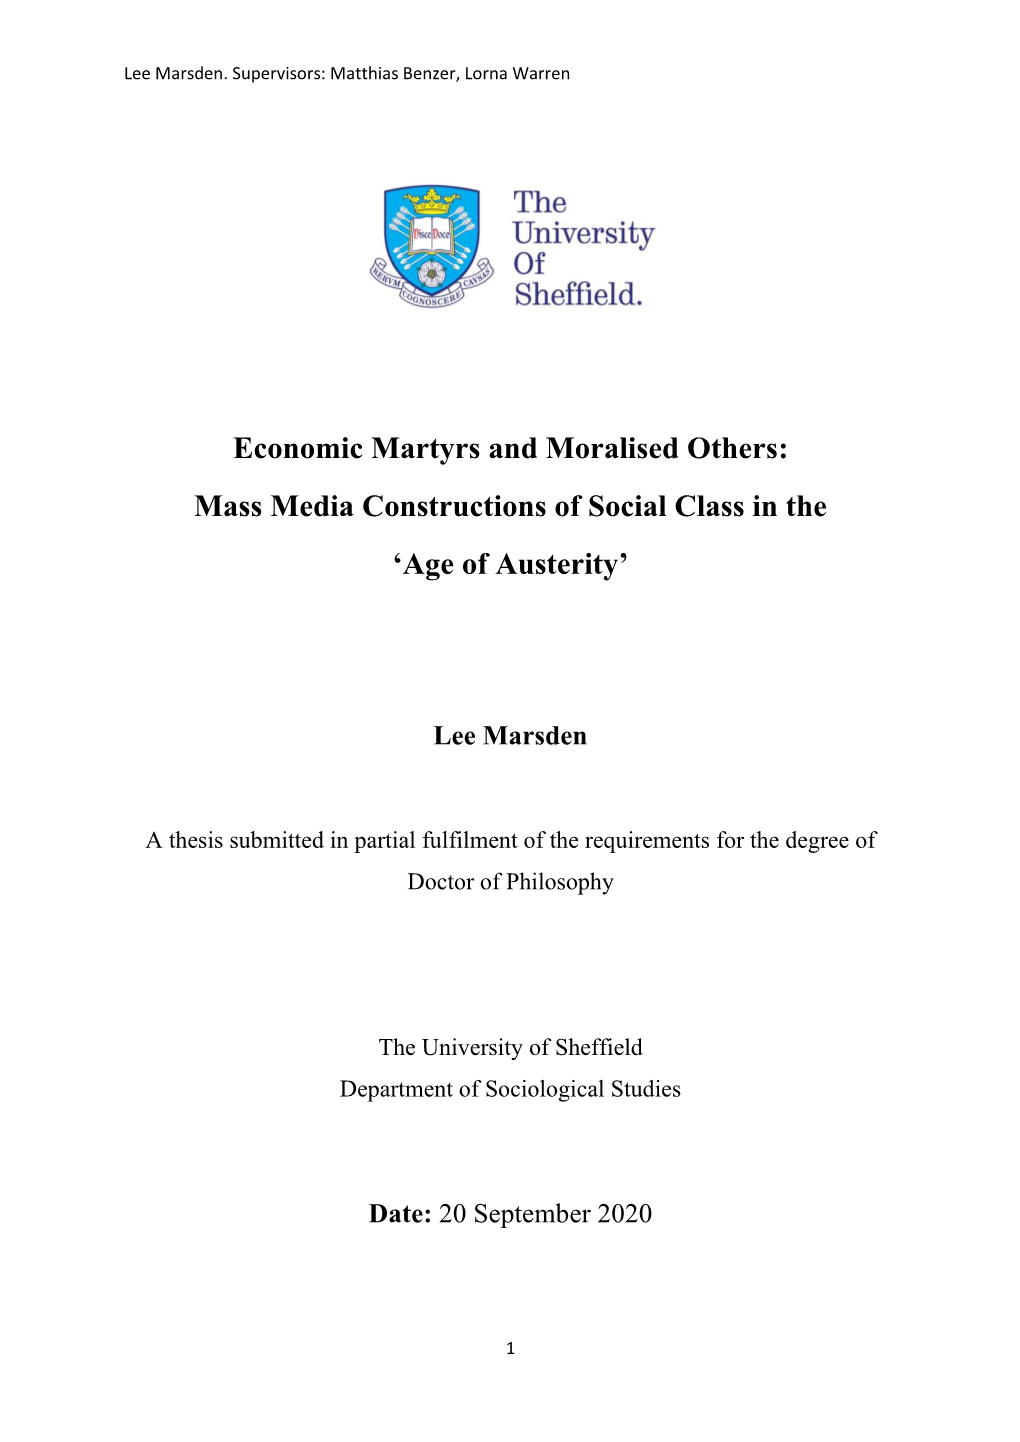 Economic Martyrs and Moralised Others: Mass Media Constructions of Social Class in the ‘Age of Austerity’